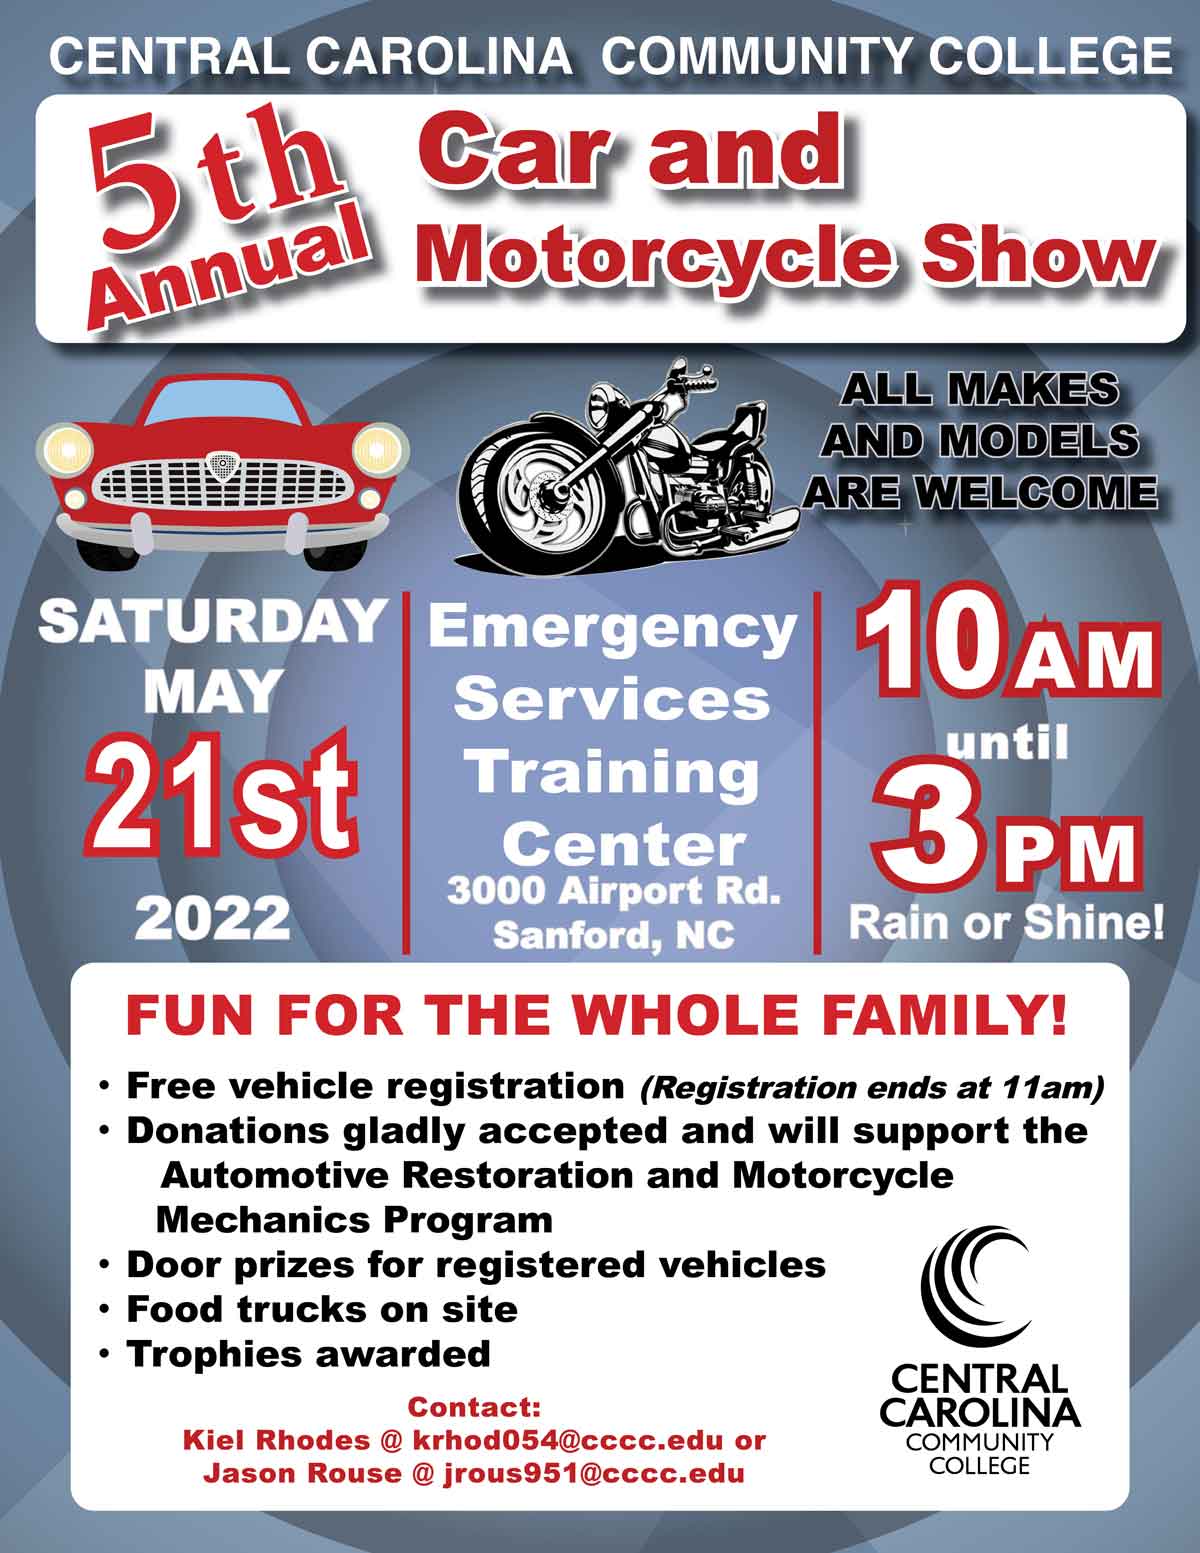 CCCC Car and Motorcycle Show set for May 21